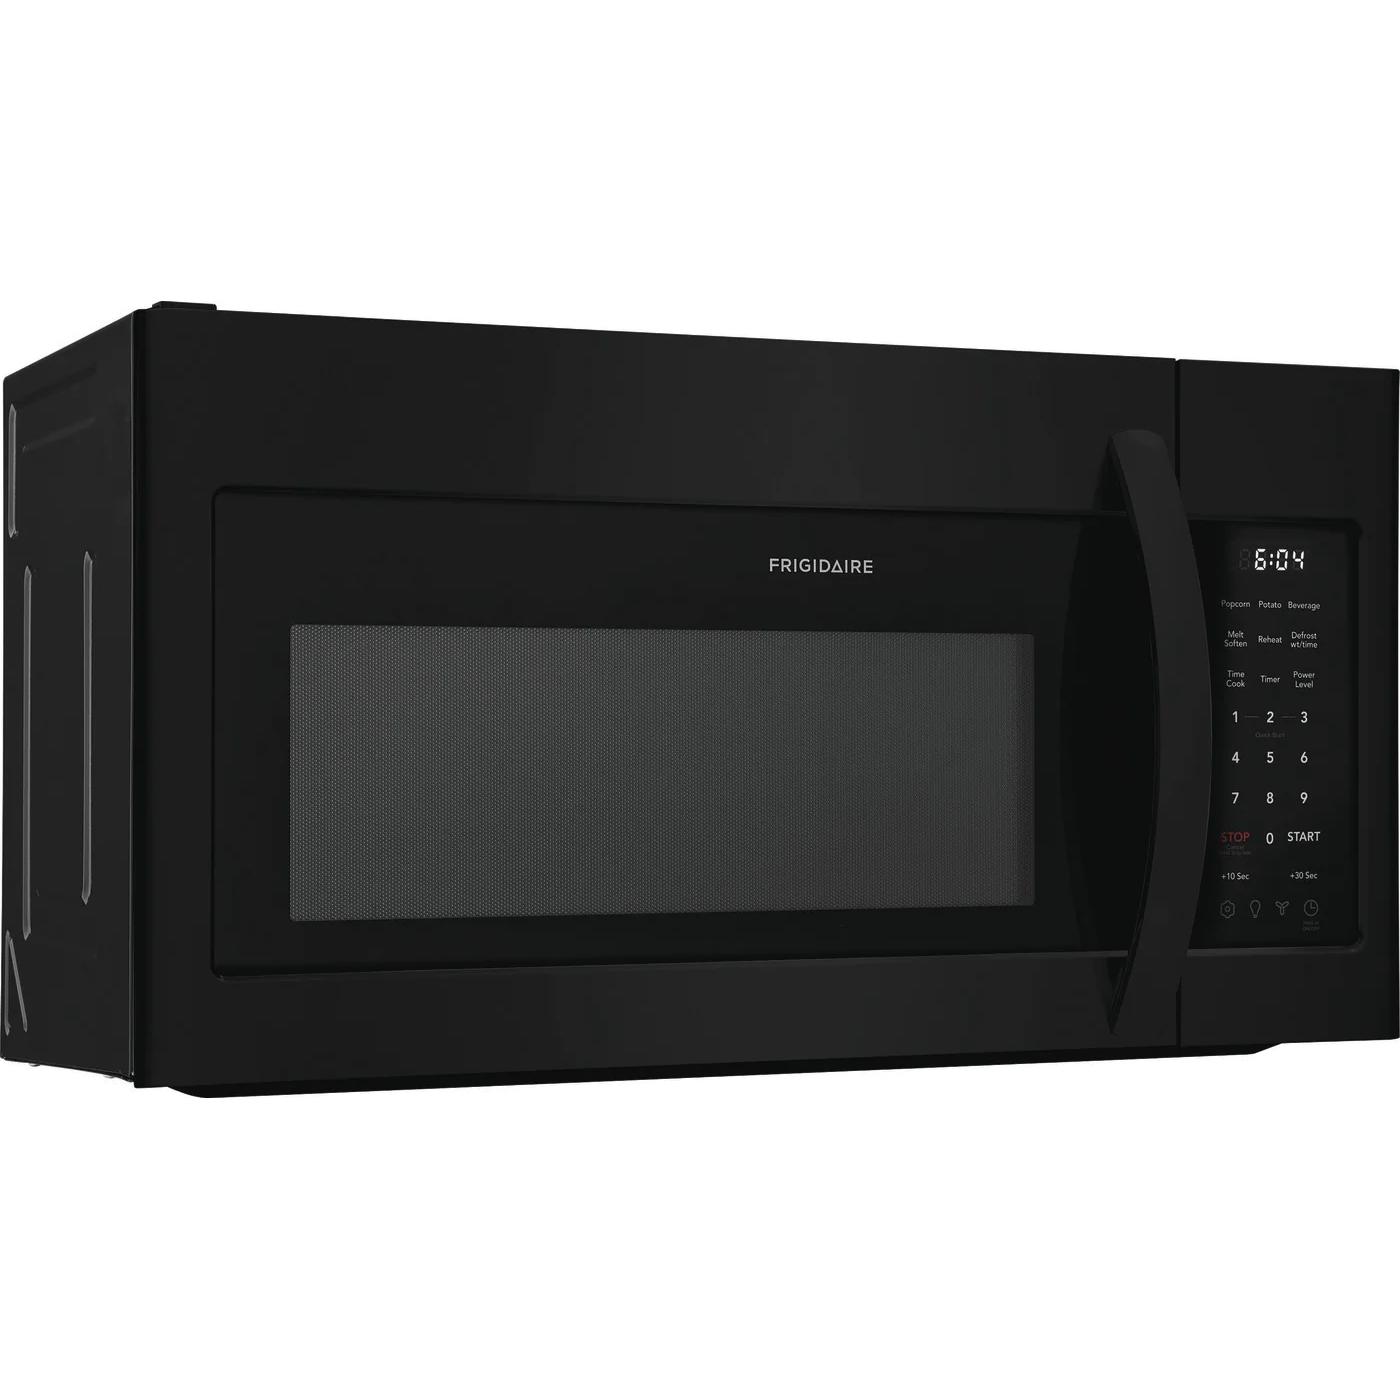 Frigidaire 30-inch, 1.8 cu.ft. Over-the-Range Microwave Oven FMOS1846BB